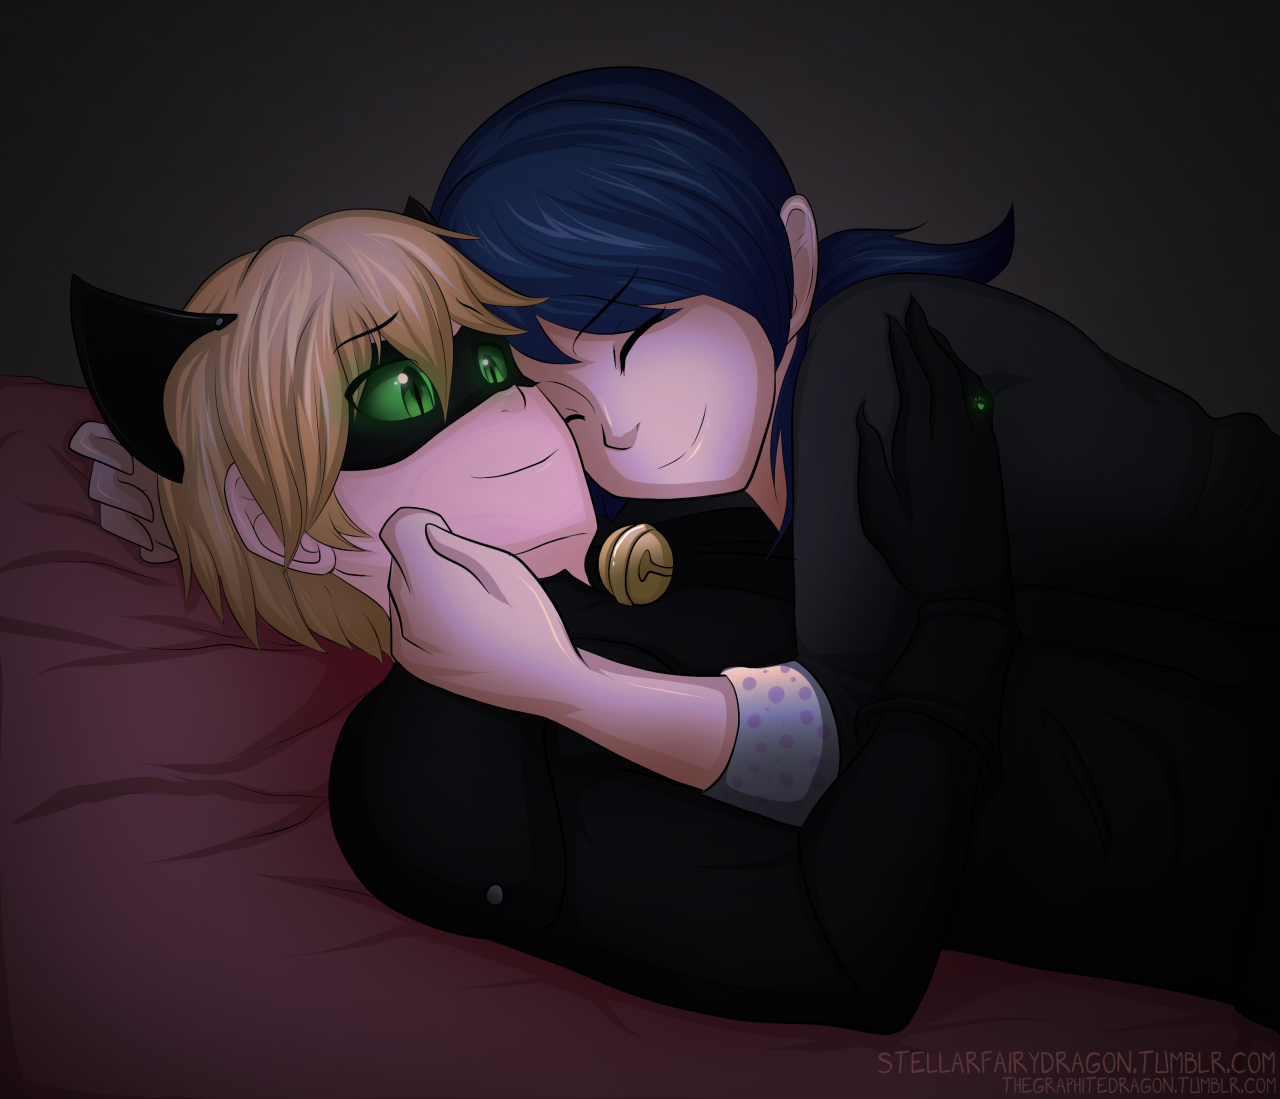 And marinette noir fanfic chat LadyBugOut (Fanfic)